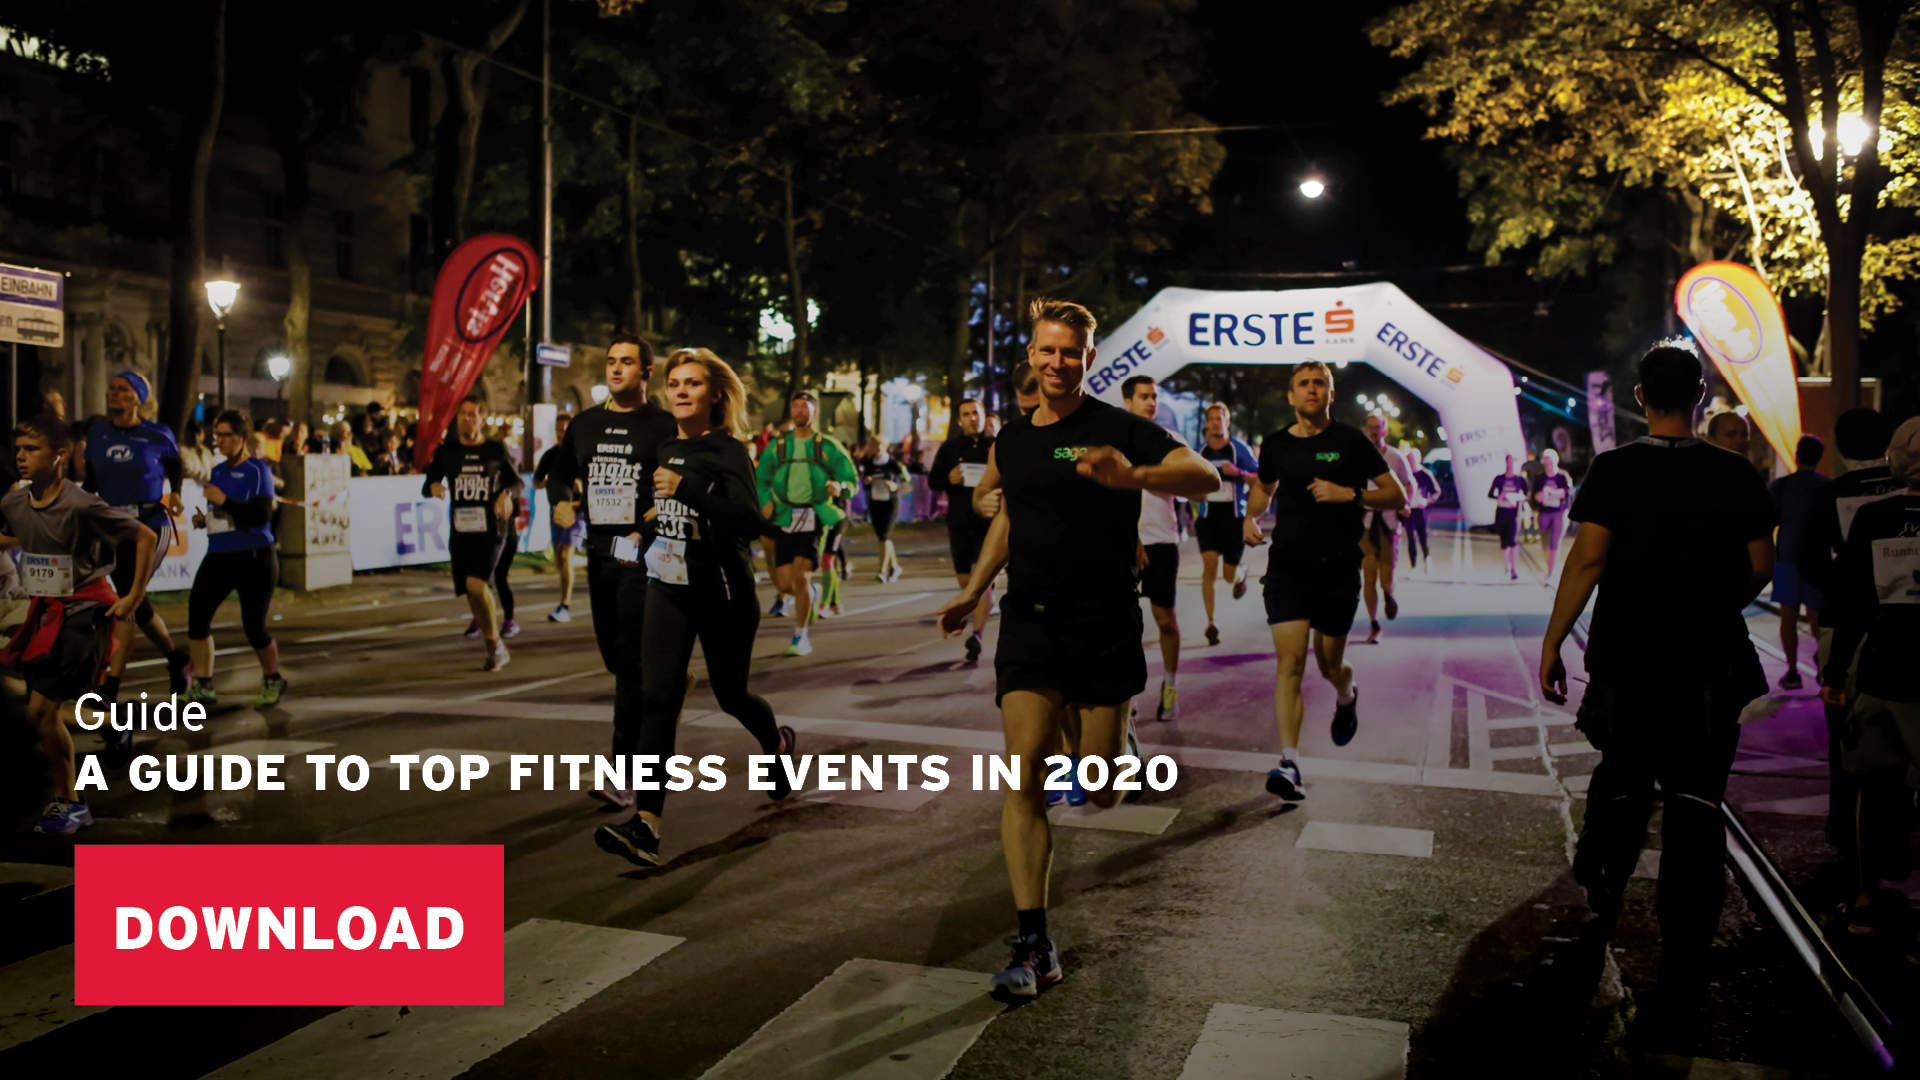 Download: Guide to top fitness events in 2020